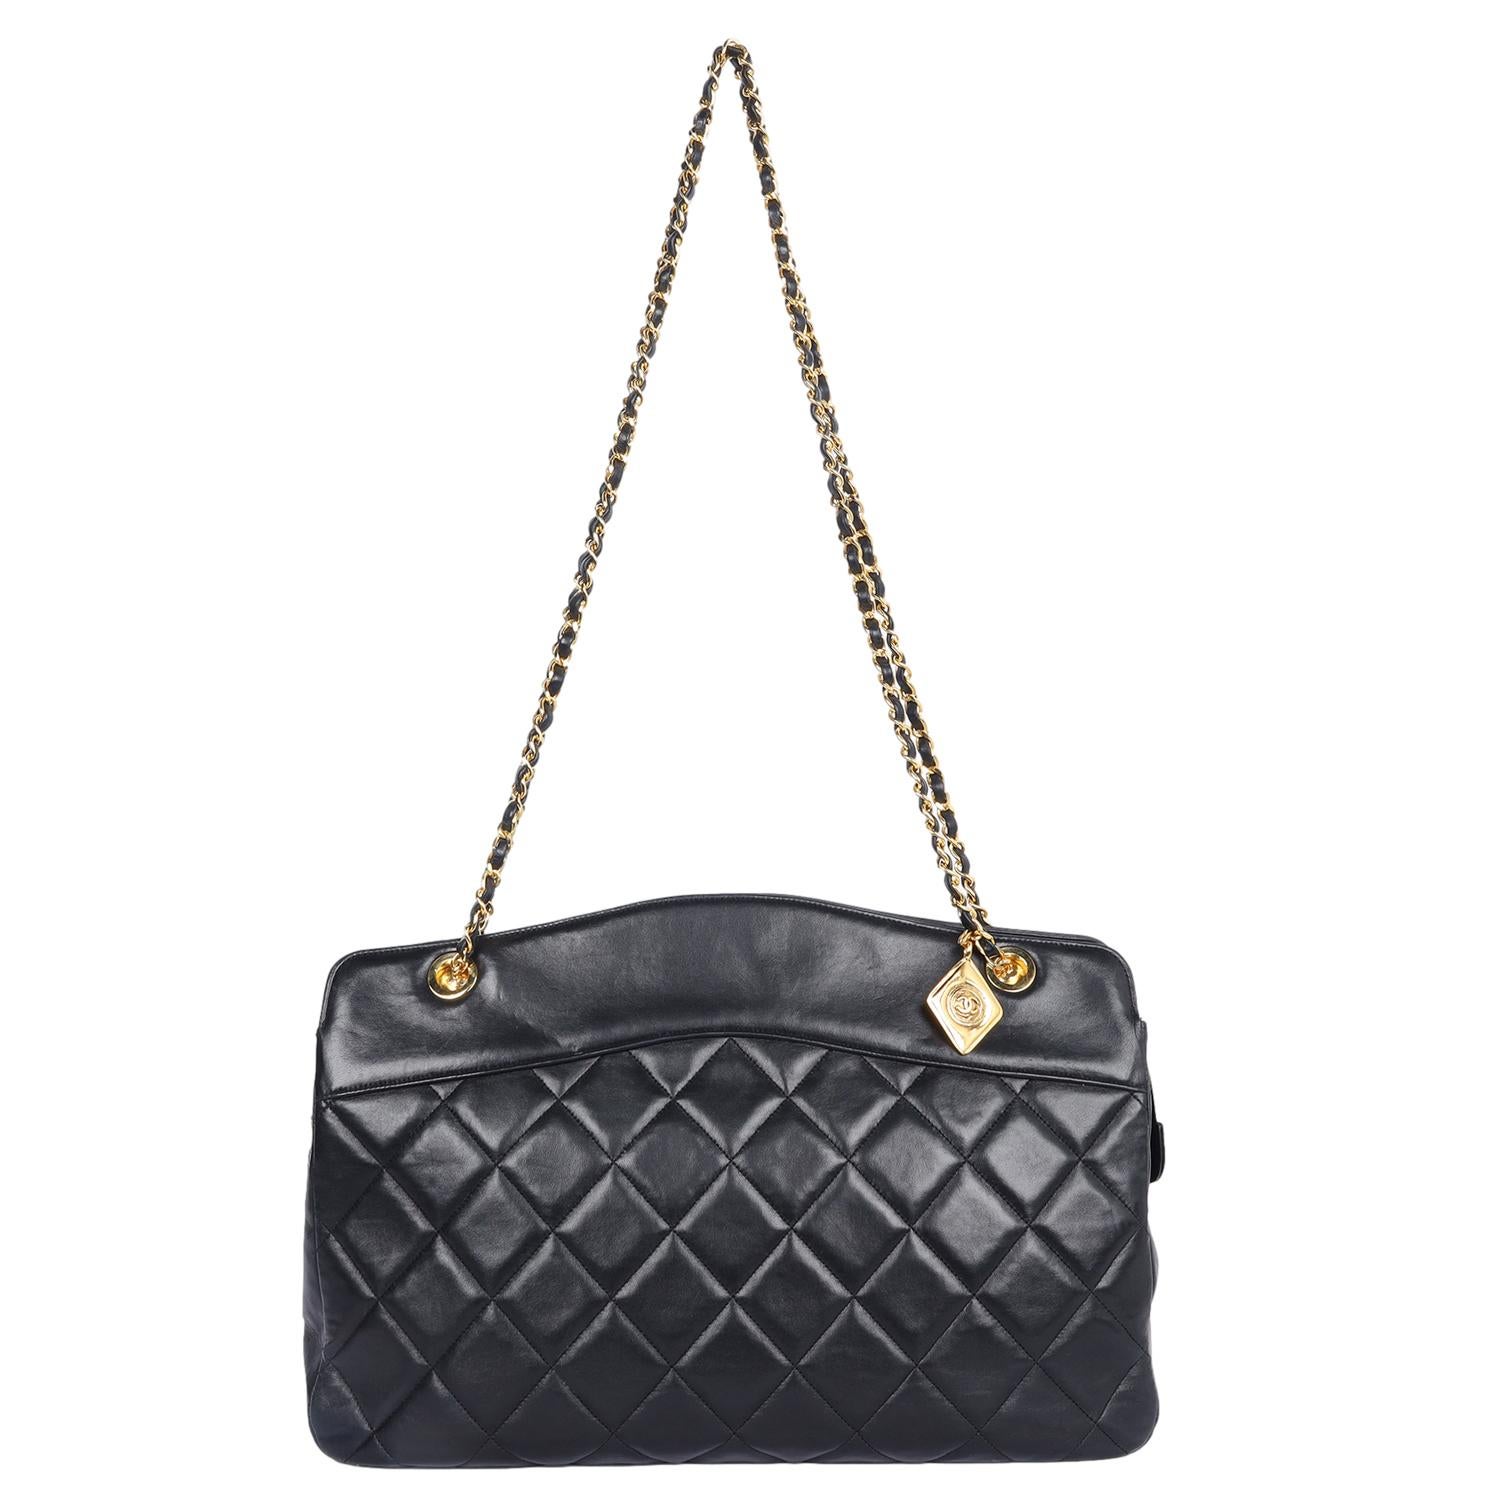 Chanel Black Quilted Lambskin Leather Crossbody Bag 1989 For Sale 1